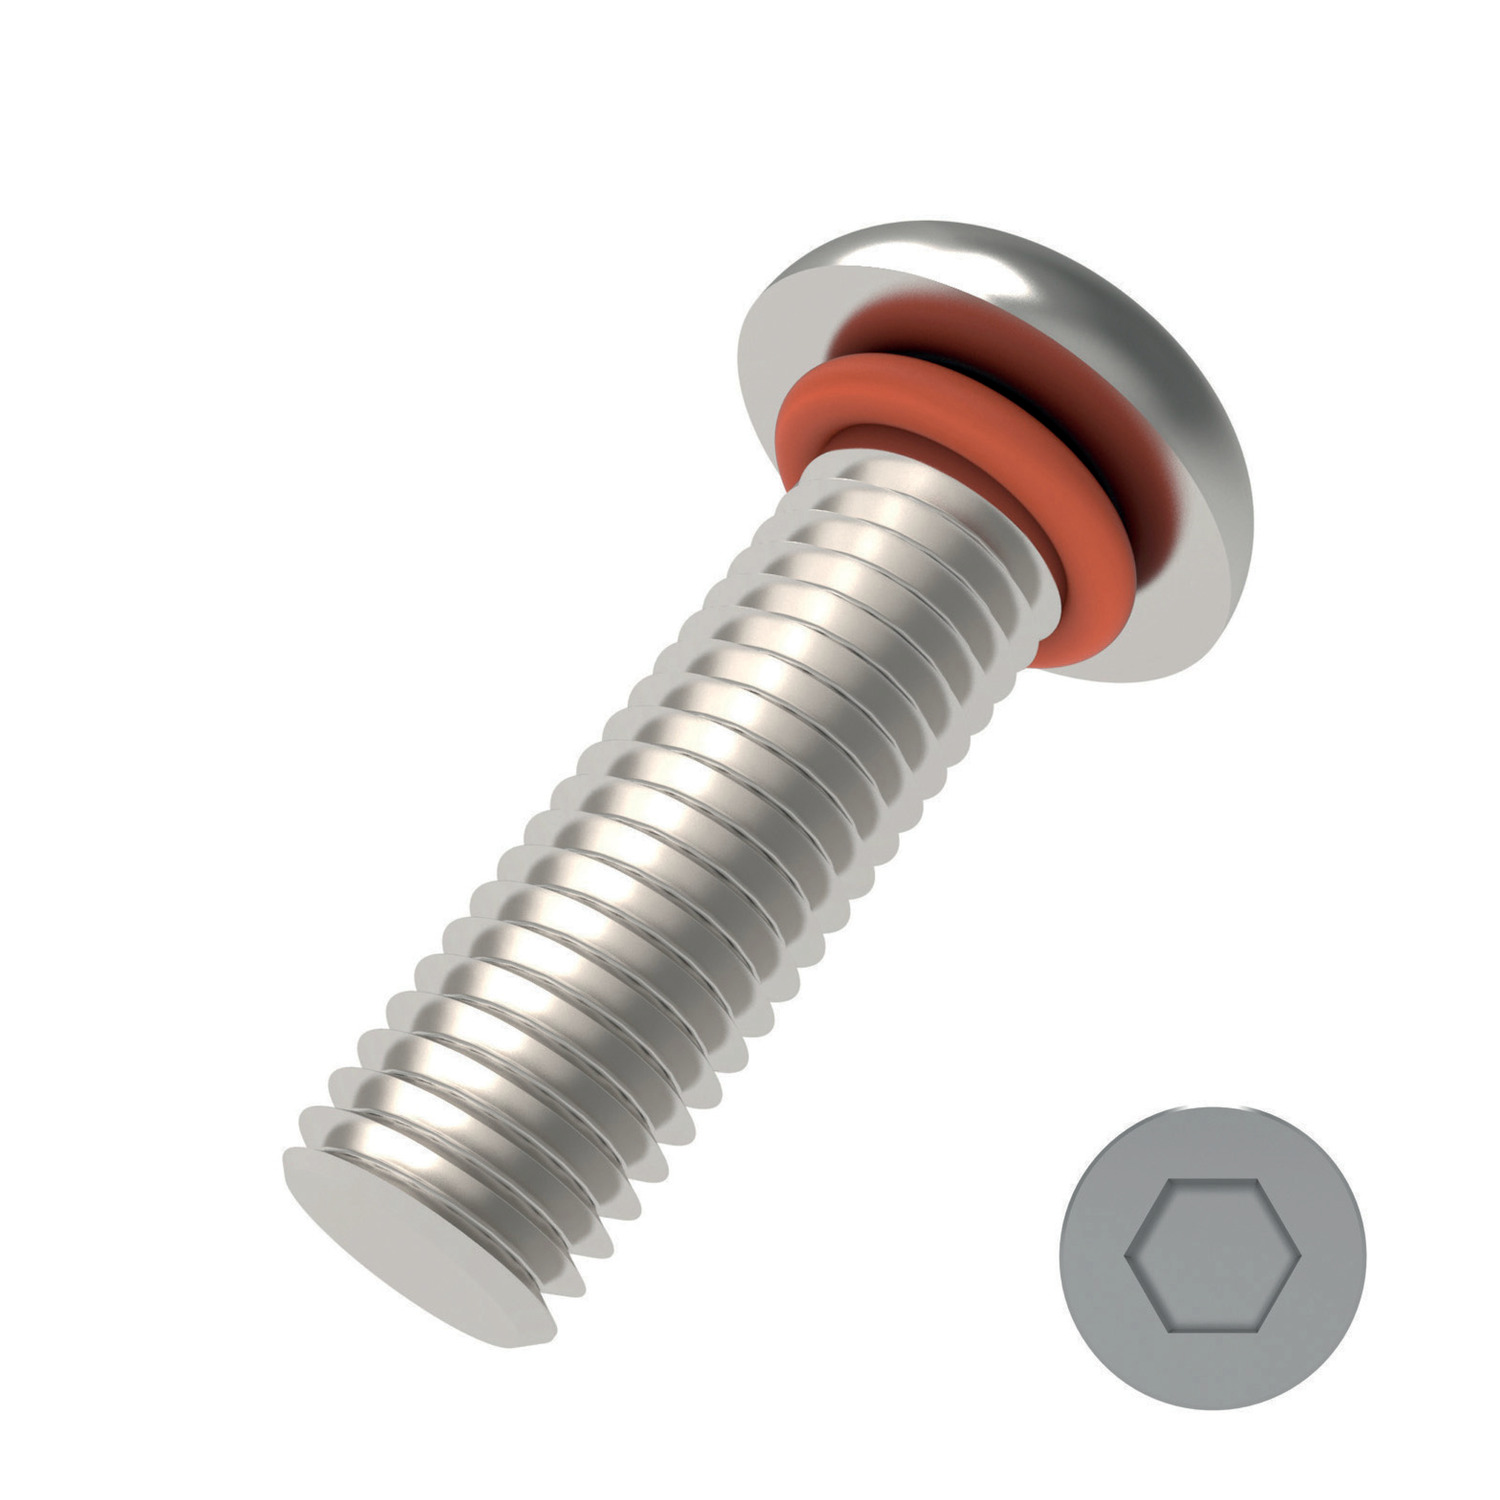 Button Head Seal Screws Button head integral sealing screws feature an O-ring underneath the screw to provide bi-direction sealing. This makes them for ideal for protection against contaminates.